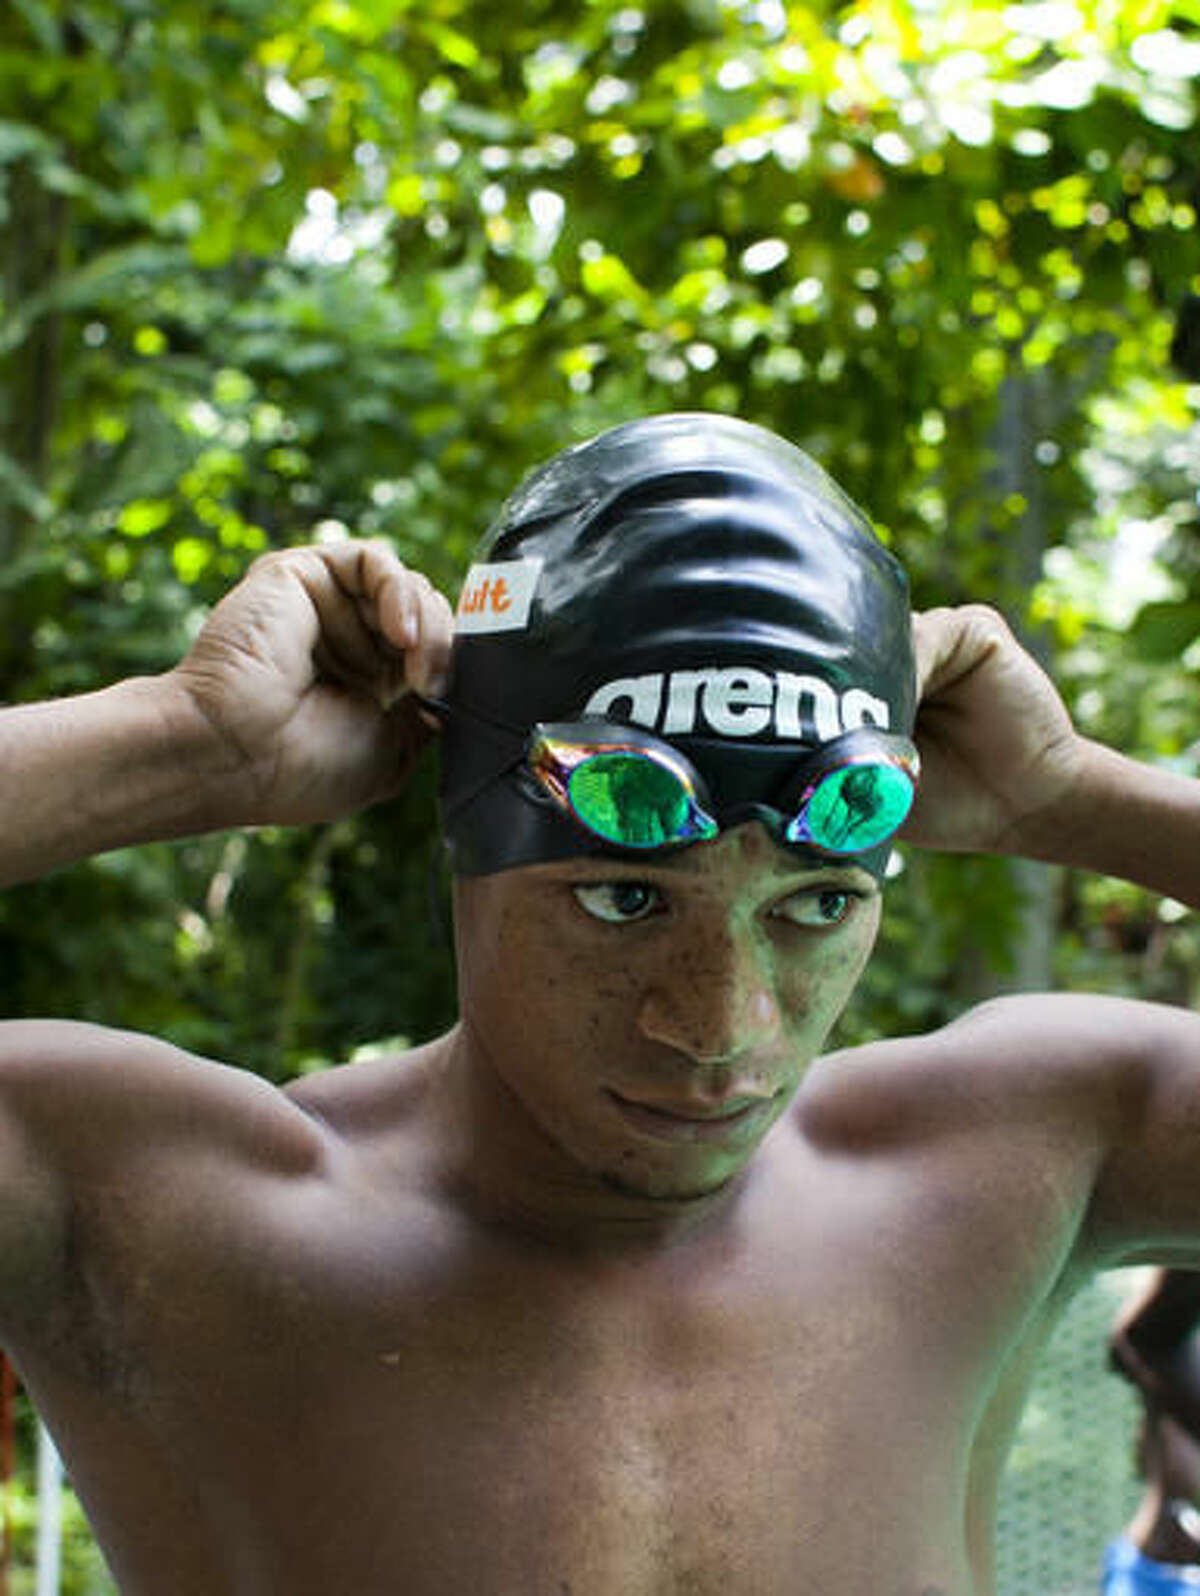 In this July 21, 2016 photo, Haitian Olympic swimmer Frantz Mike Itelord Dorsainvil readies for a day of training in preparation for the Rio Summer Olympic Games, at a private swimming pool in the Port-au-Prince neighborhood Carrefour, Haiti. The lanky 25-year-old swimmer who only began to swim competitively six years ago is aiming to win a medal in the Rio Olympics. (AP Photo/Dieu Nalio Chery)